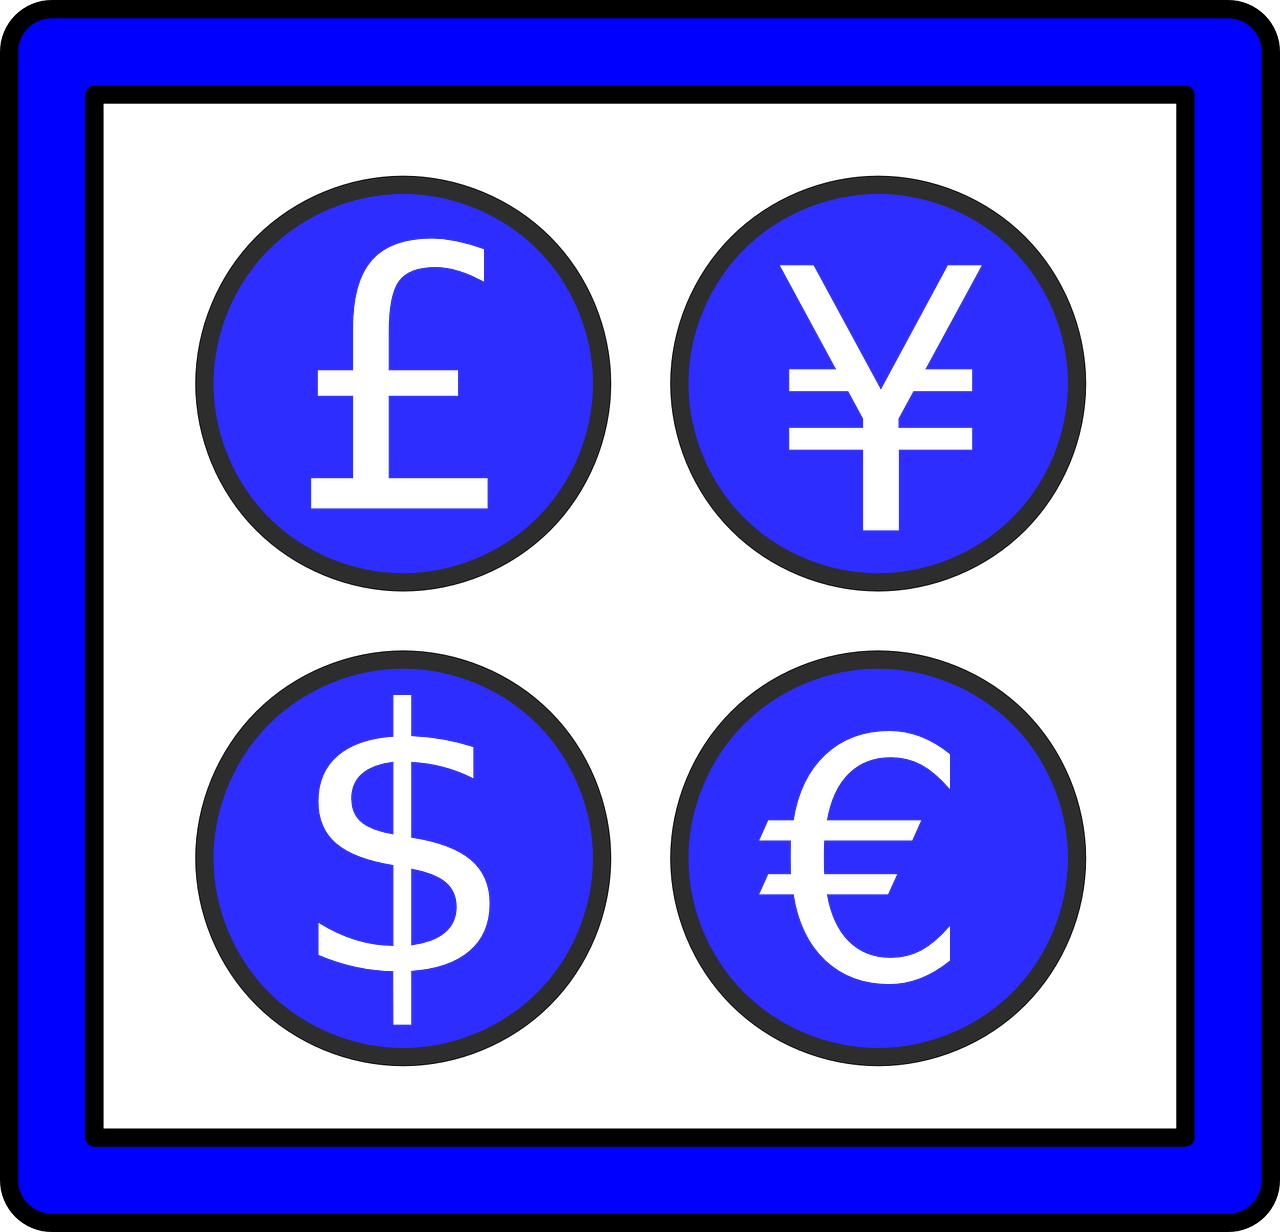 currency signs money signs currency symbols free photo